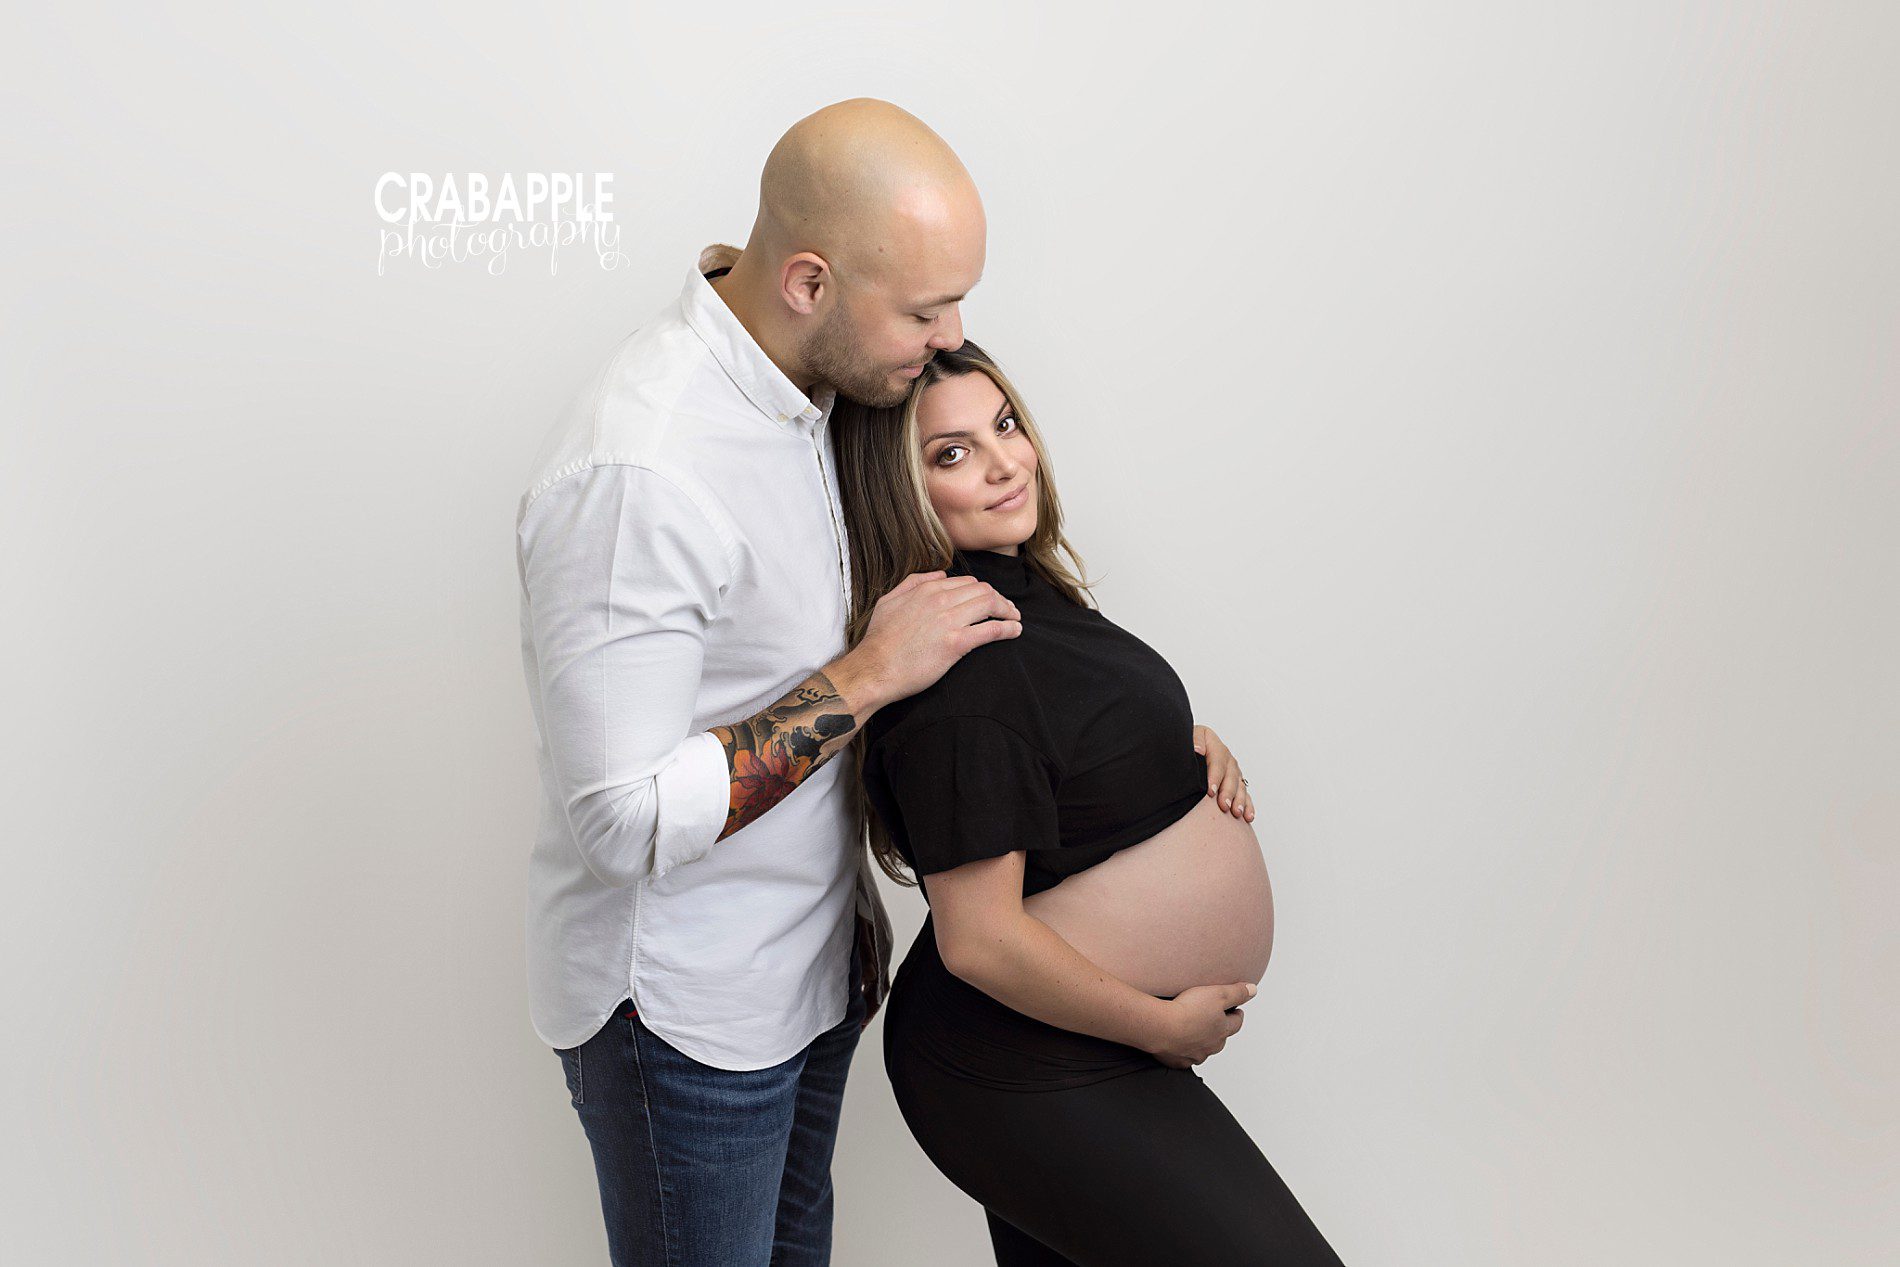 styling for maternity photos using only black and white